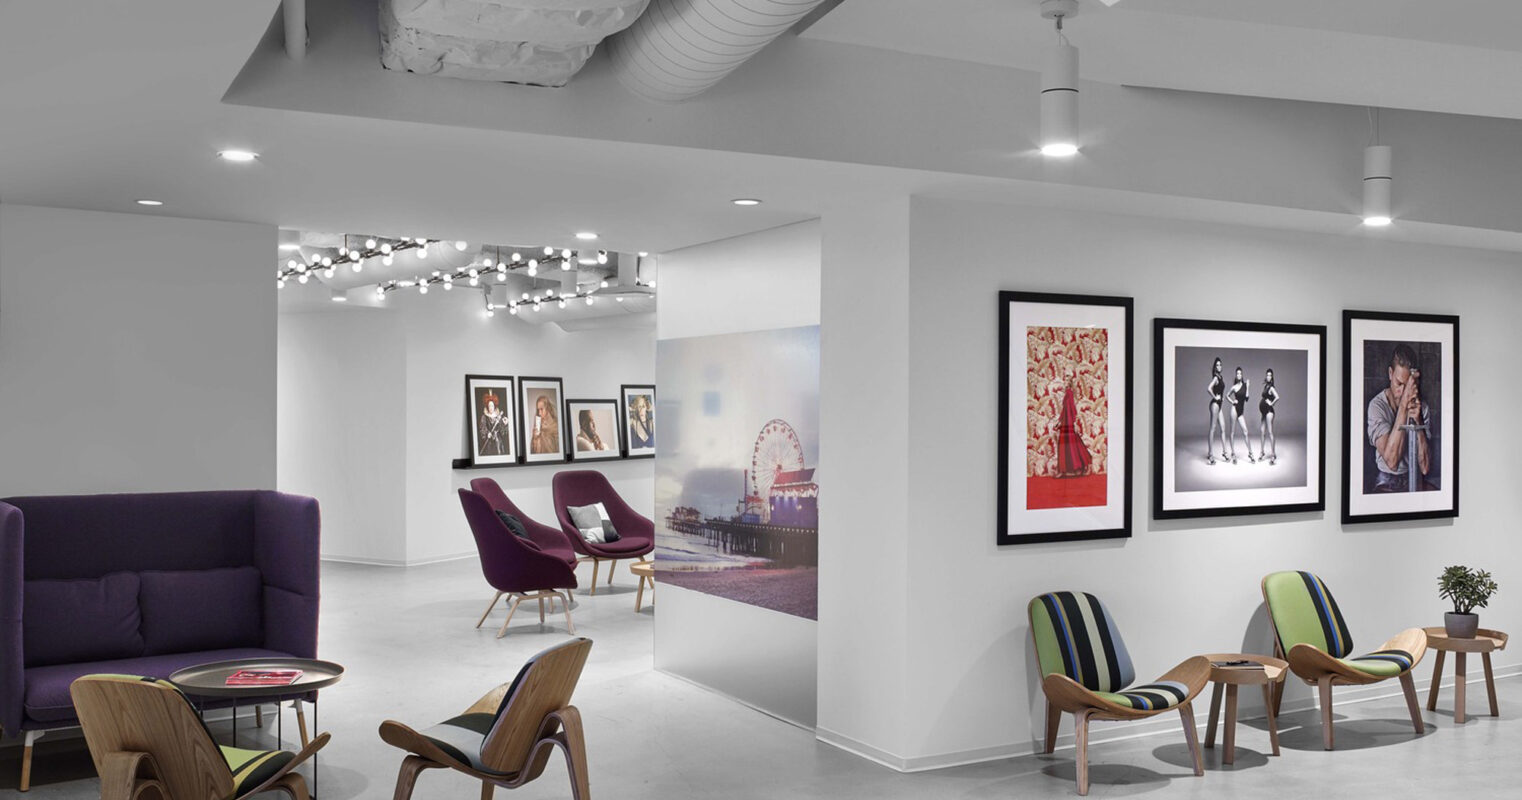 Modern gallery-like interior featuring polished concrete floors, exposed HVAC ductwork on the ceiling, and a mix of vibrant mid-century modern furnishings against a backdrop of bold, framed artwork. A subtle play of textures emerges between the sleek surfaces and soft seating elements.